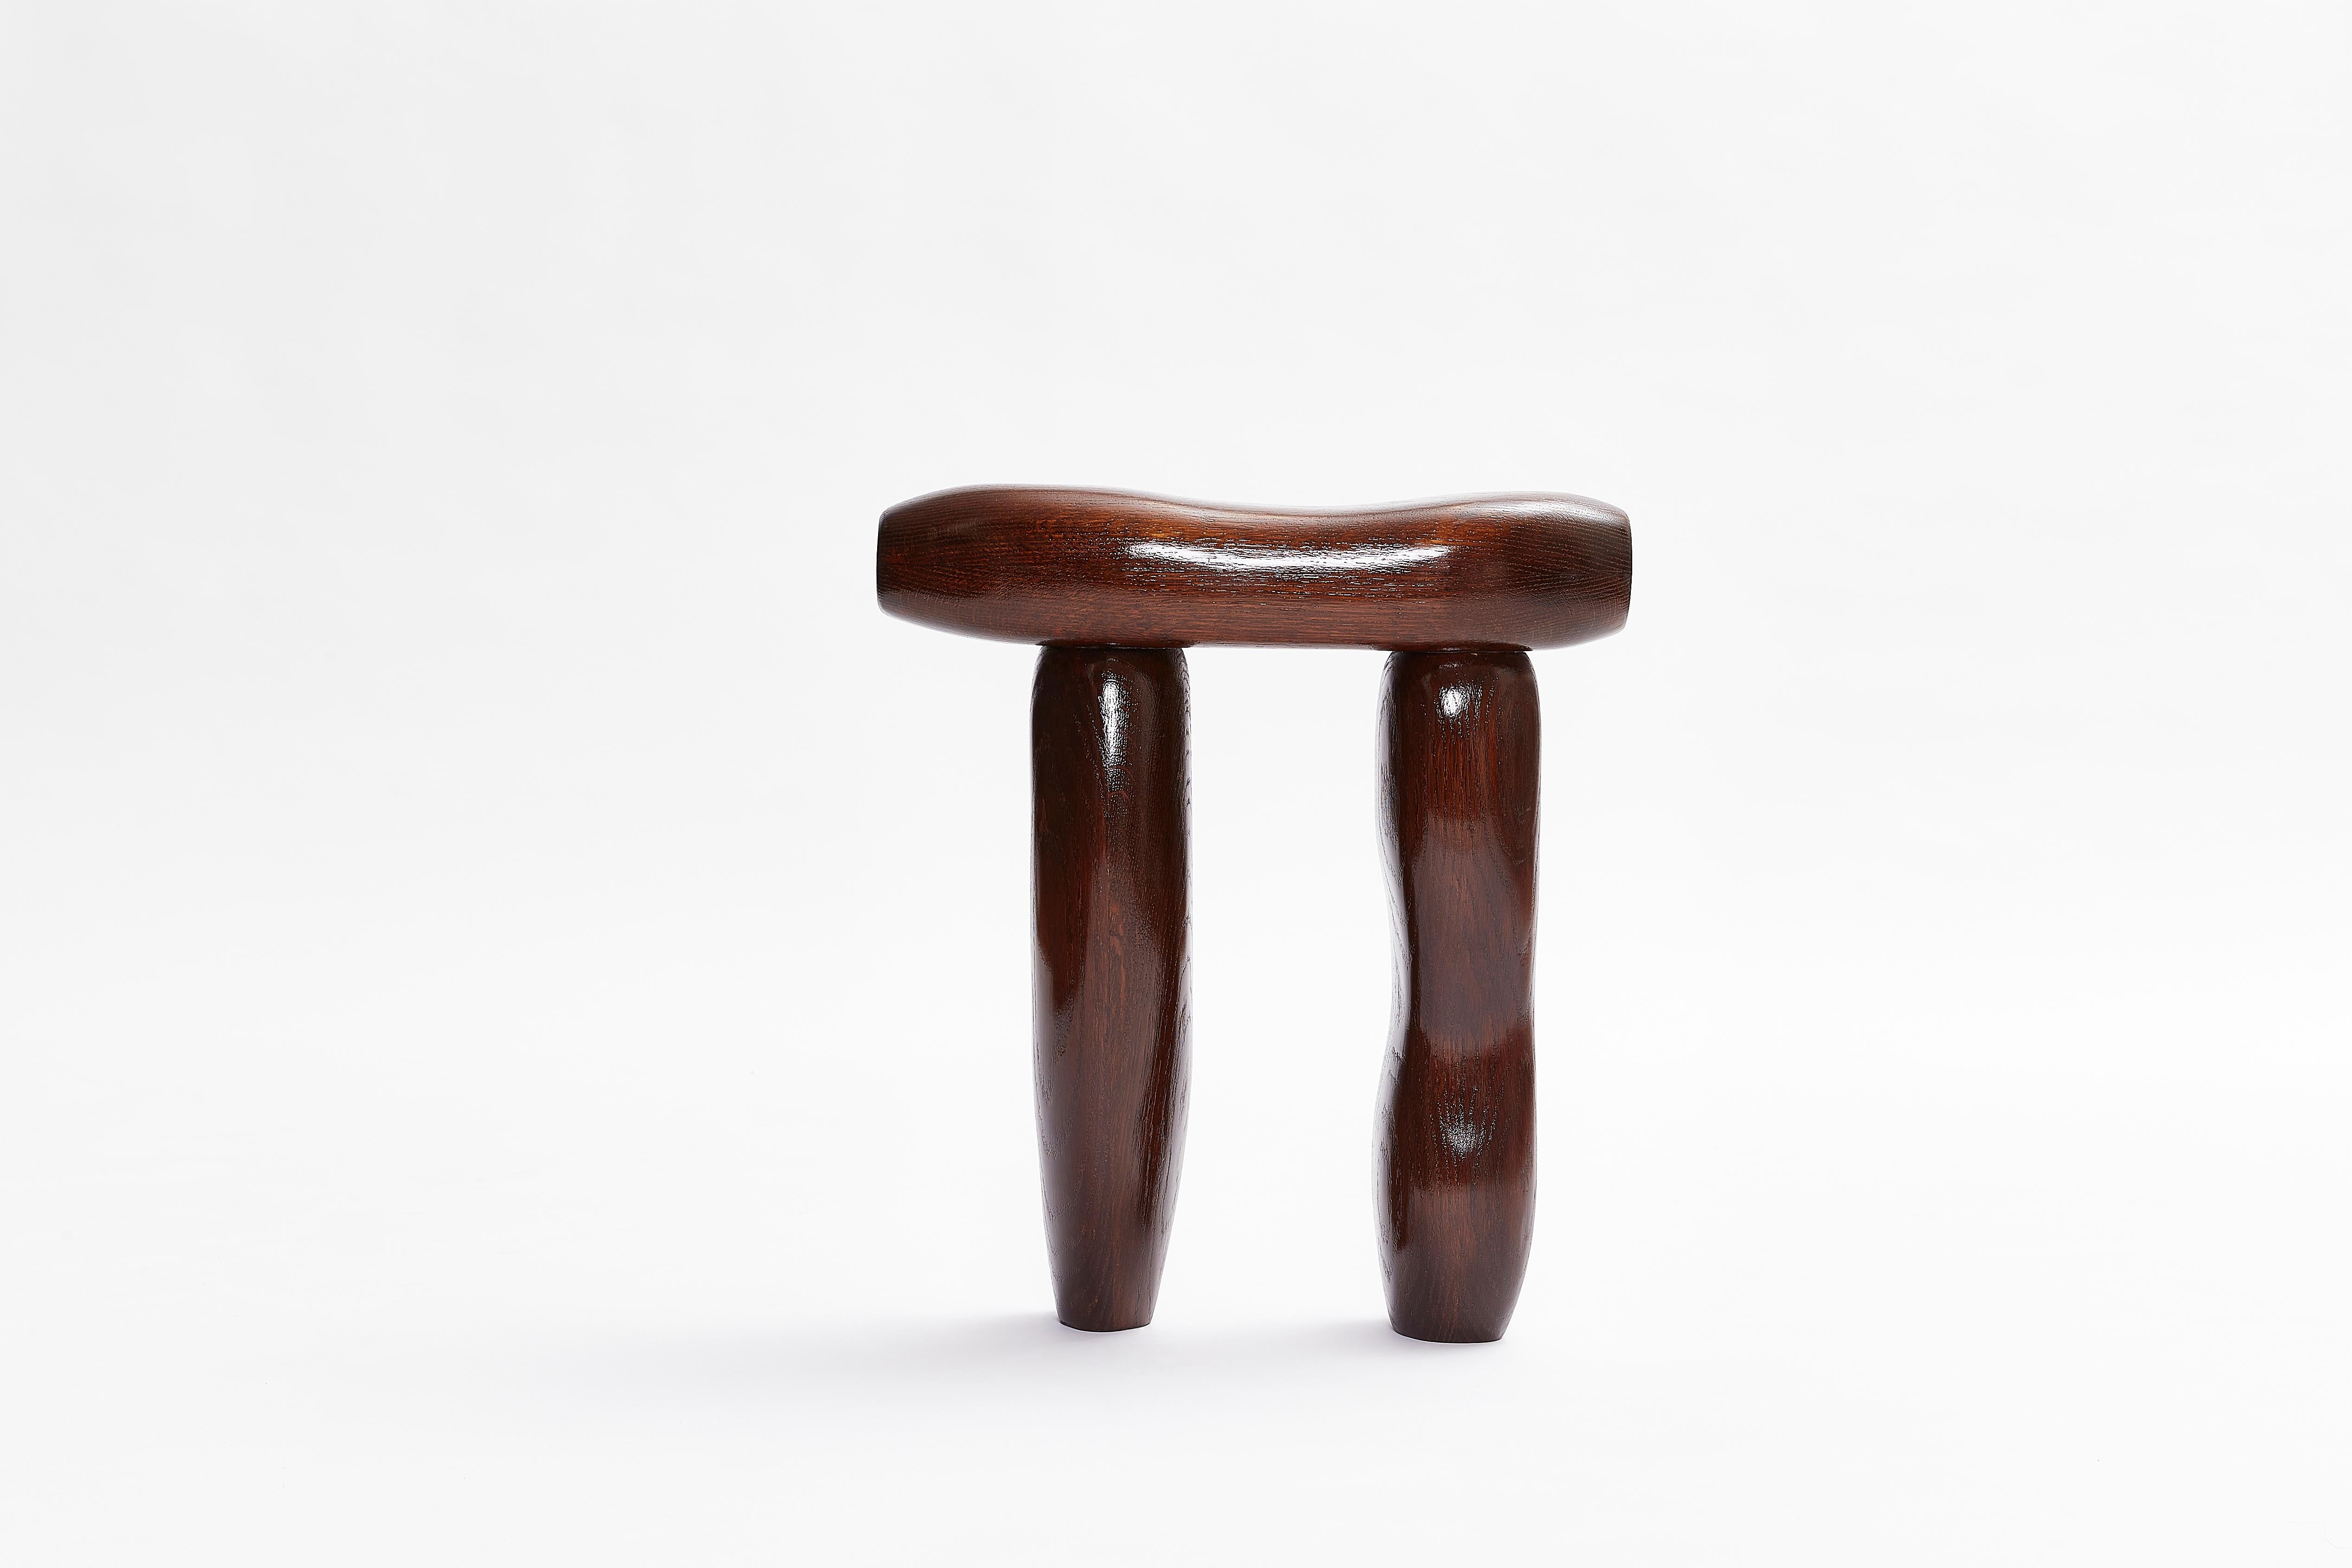 A narrow stool setting of three disjointed forms, pressed against one another. To be used whenever one needs to sit with their thoughts. Made from tinted American Oak. From Hard Candy series.

TSBTD (The Stone by the Door) was founded in